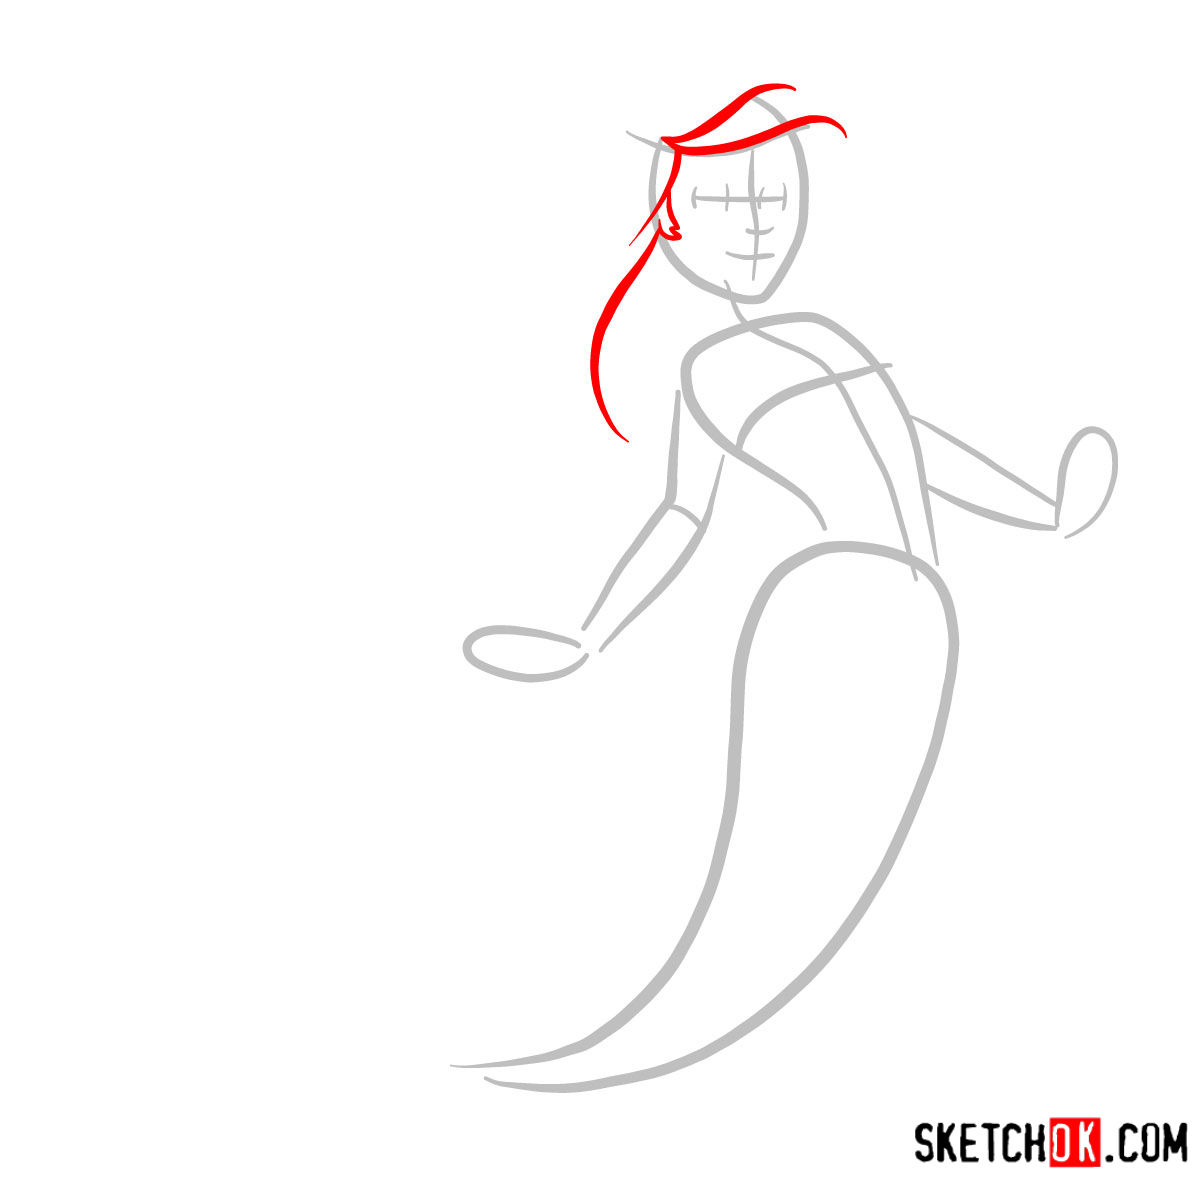 How to draw cute Ariel | The Little Mermaid - step 02